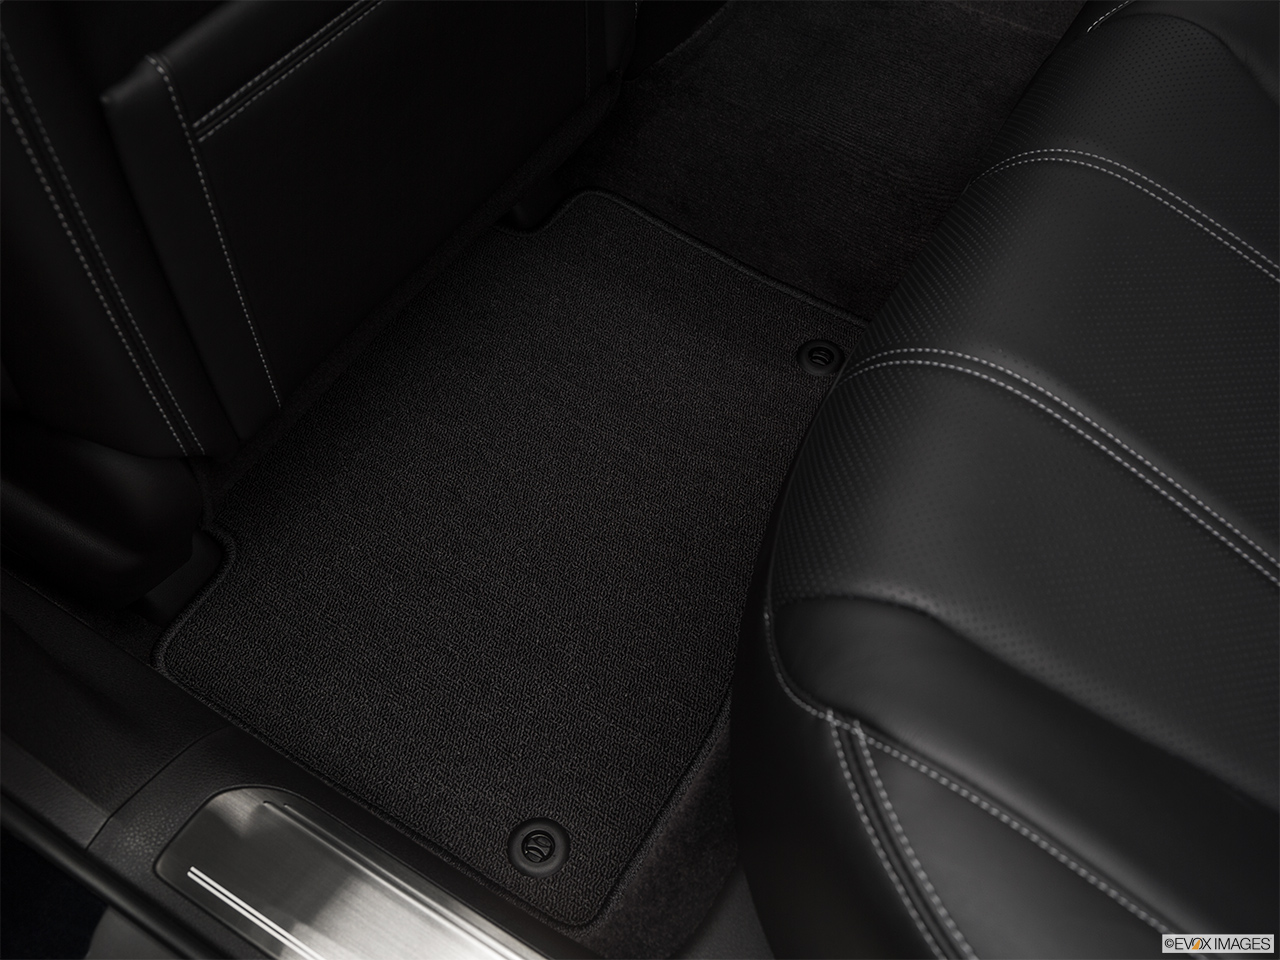 2018 Acura RLX Base Rear driver's side floor mat. Mid-seat level from outside looking in. 